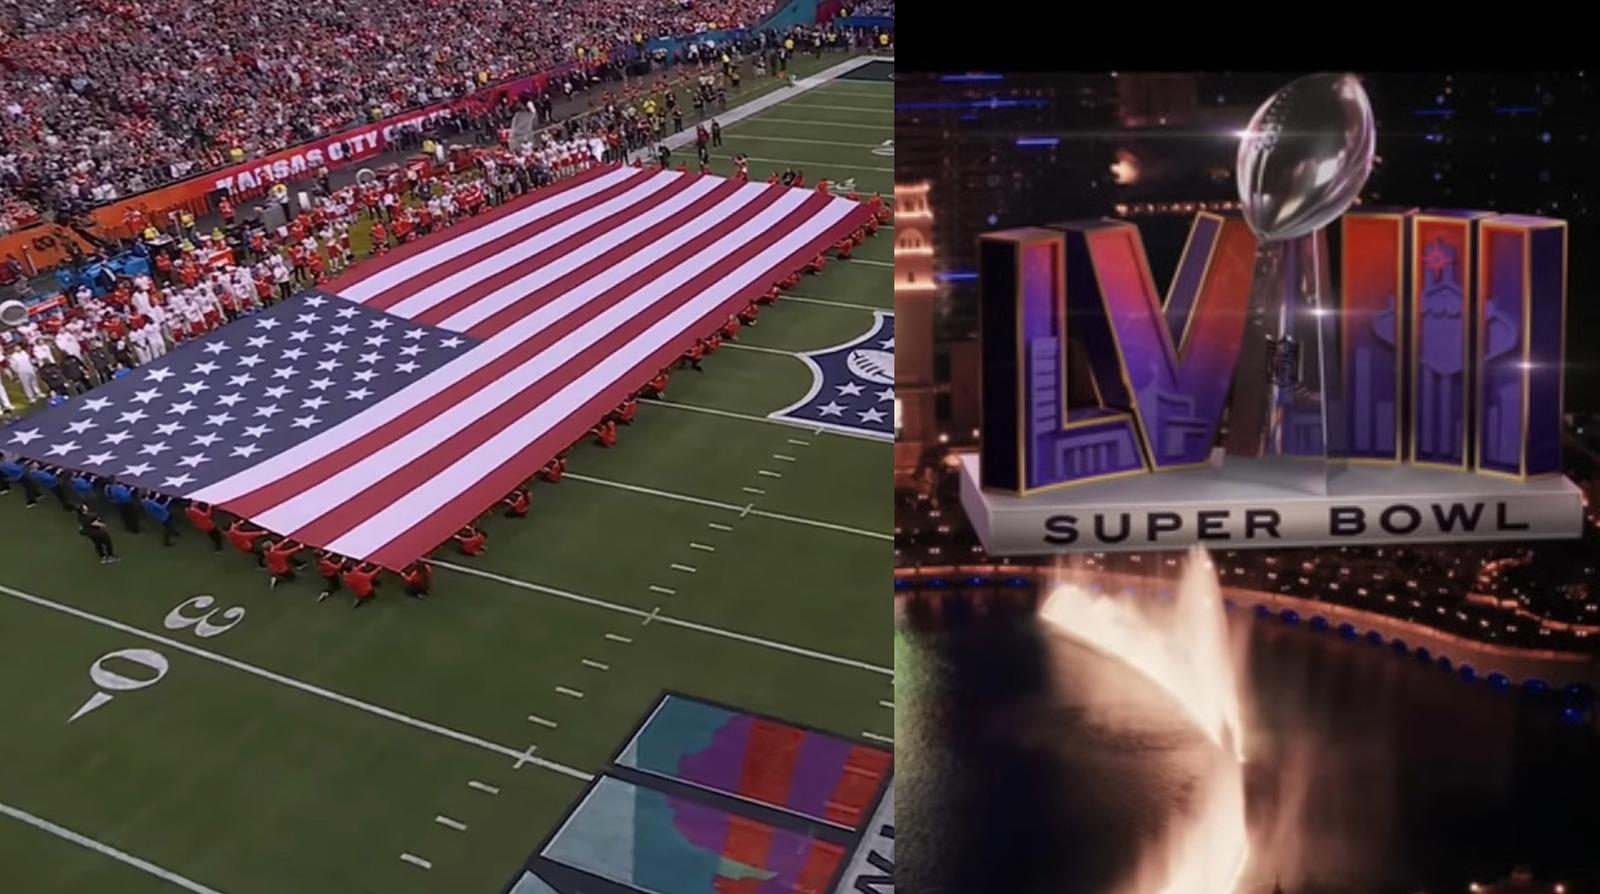 Super Bowl LVIII will begin with a rousing rendition of the US National Anthem by country music star Reba McEntire